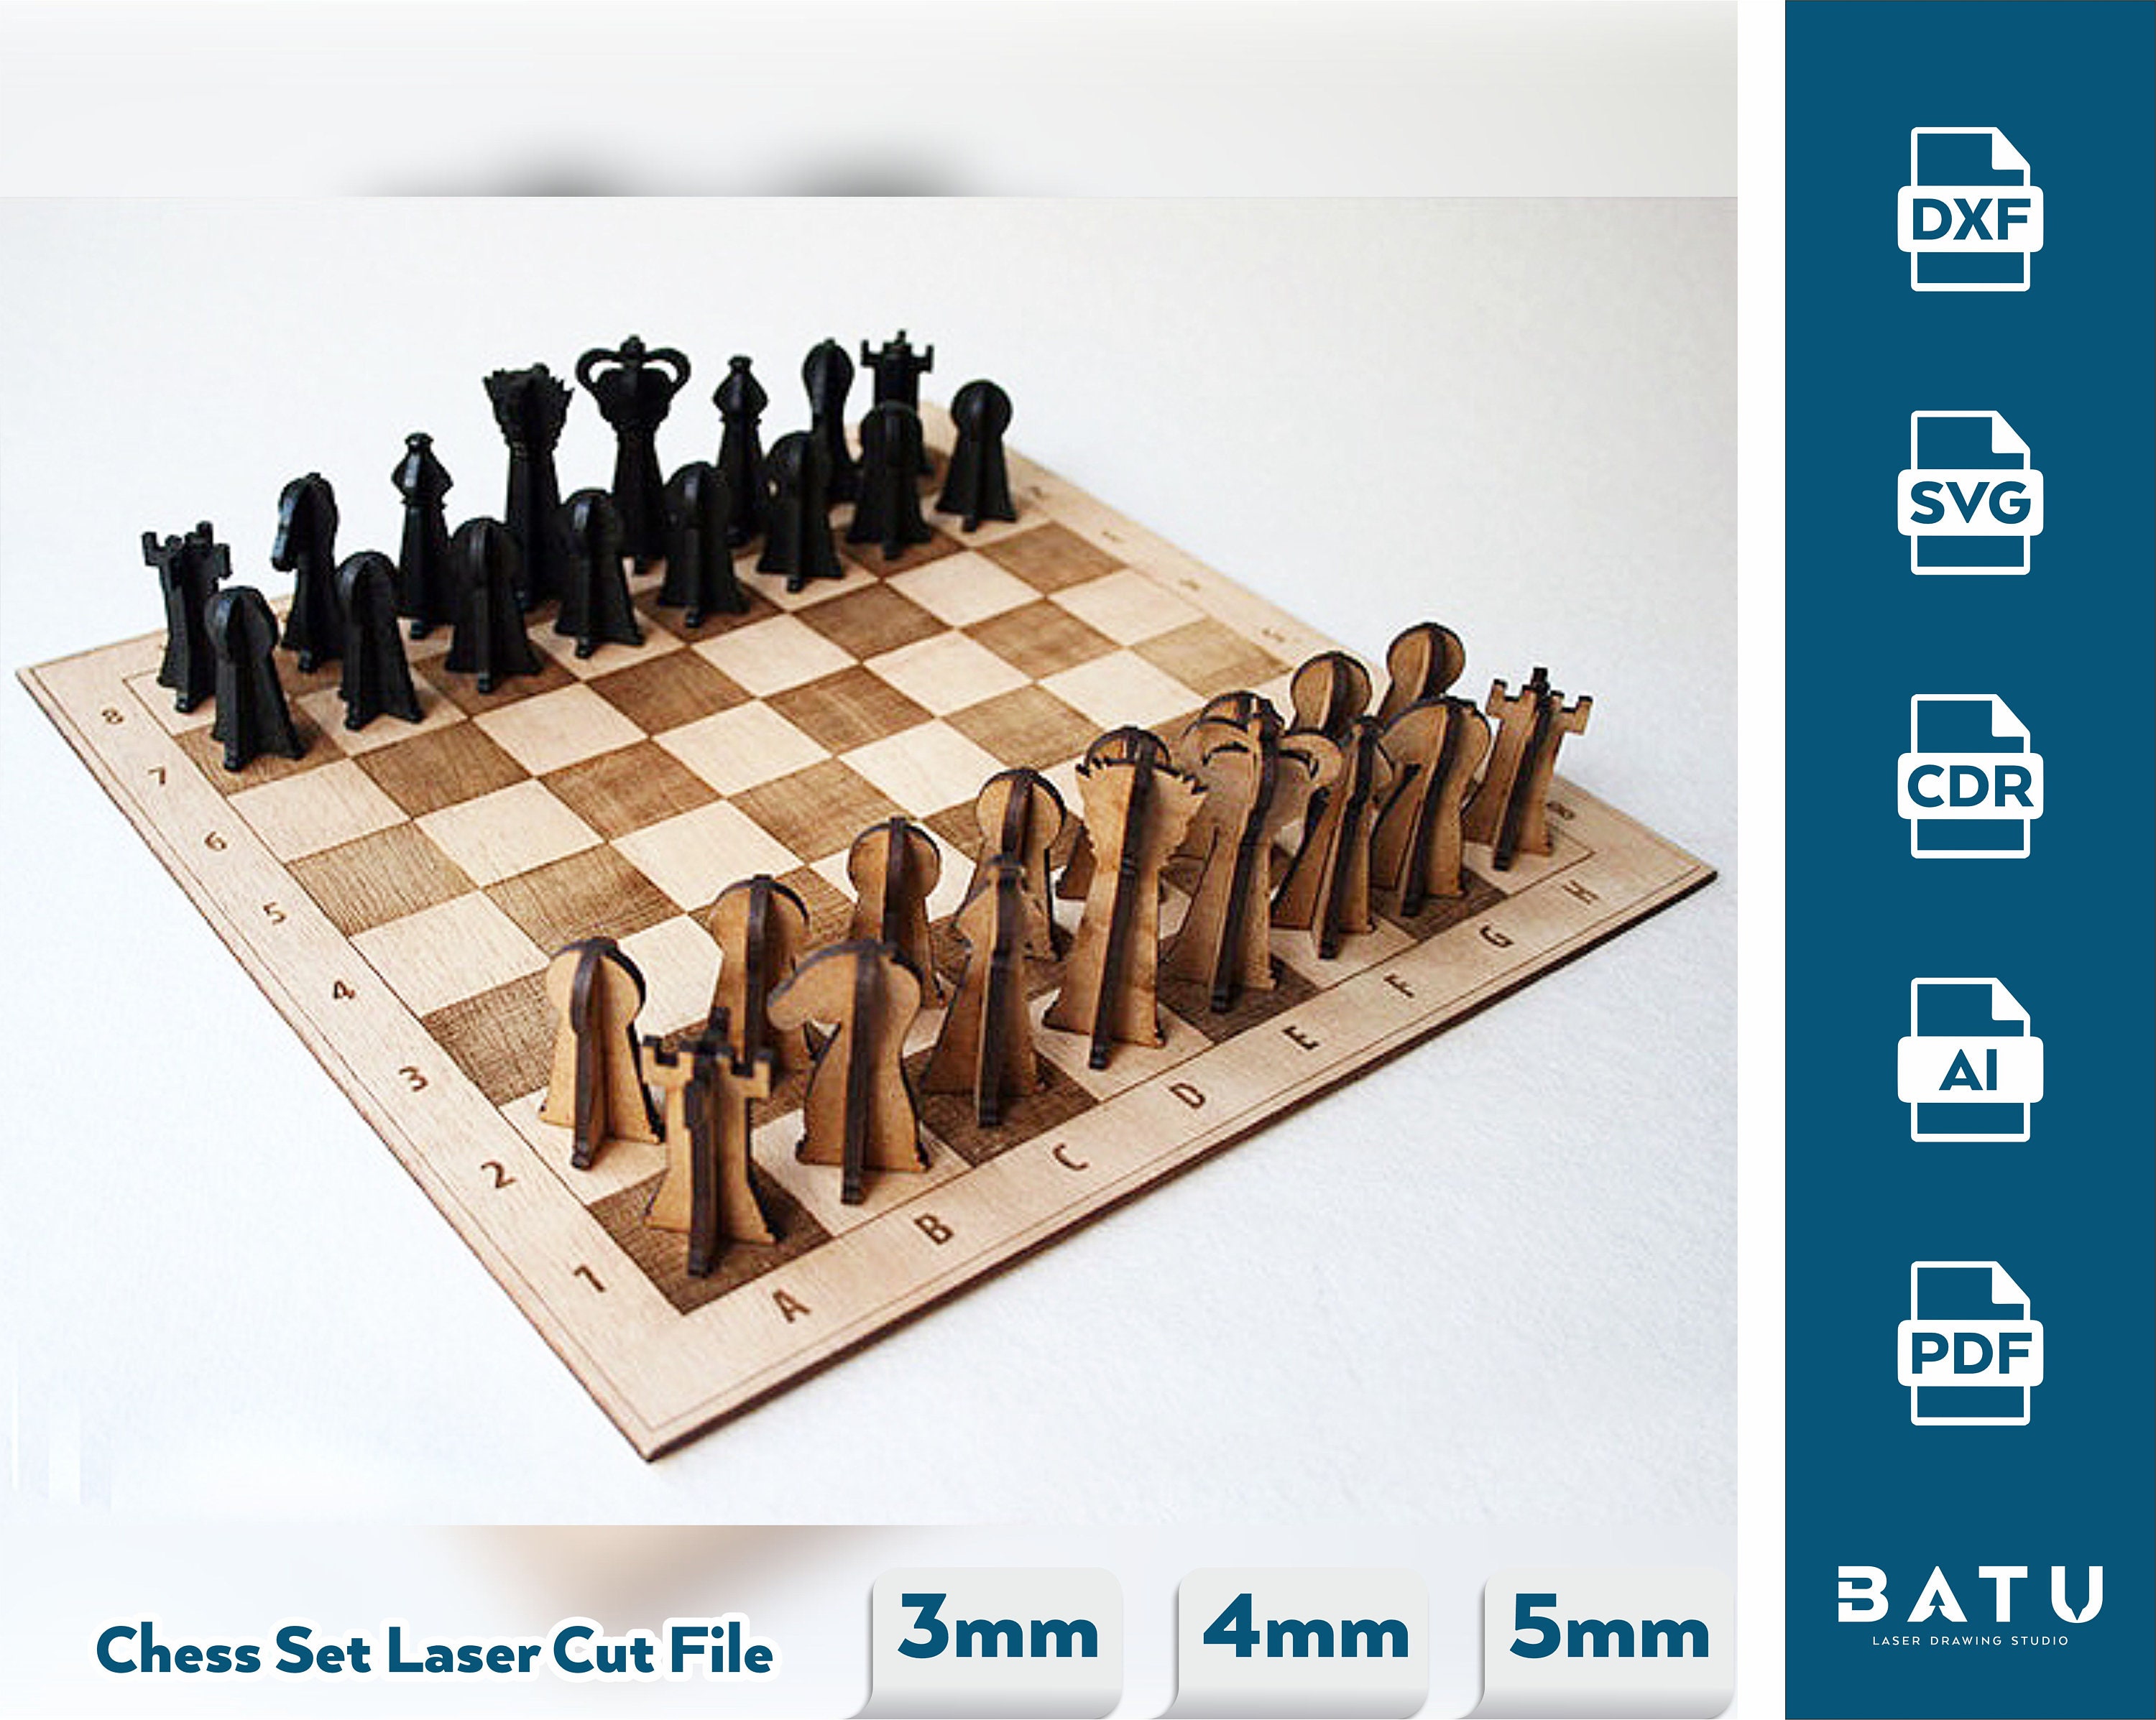 Laser Cut Engraved Chess Set Free Vector cdr Download 